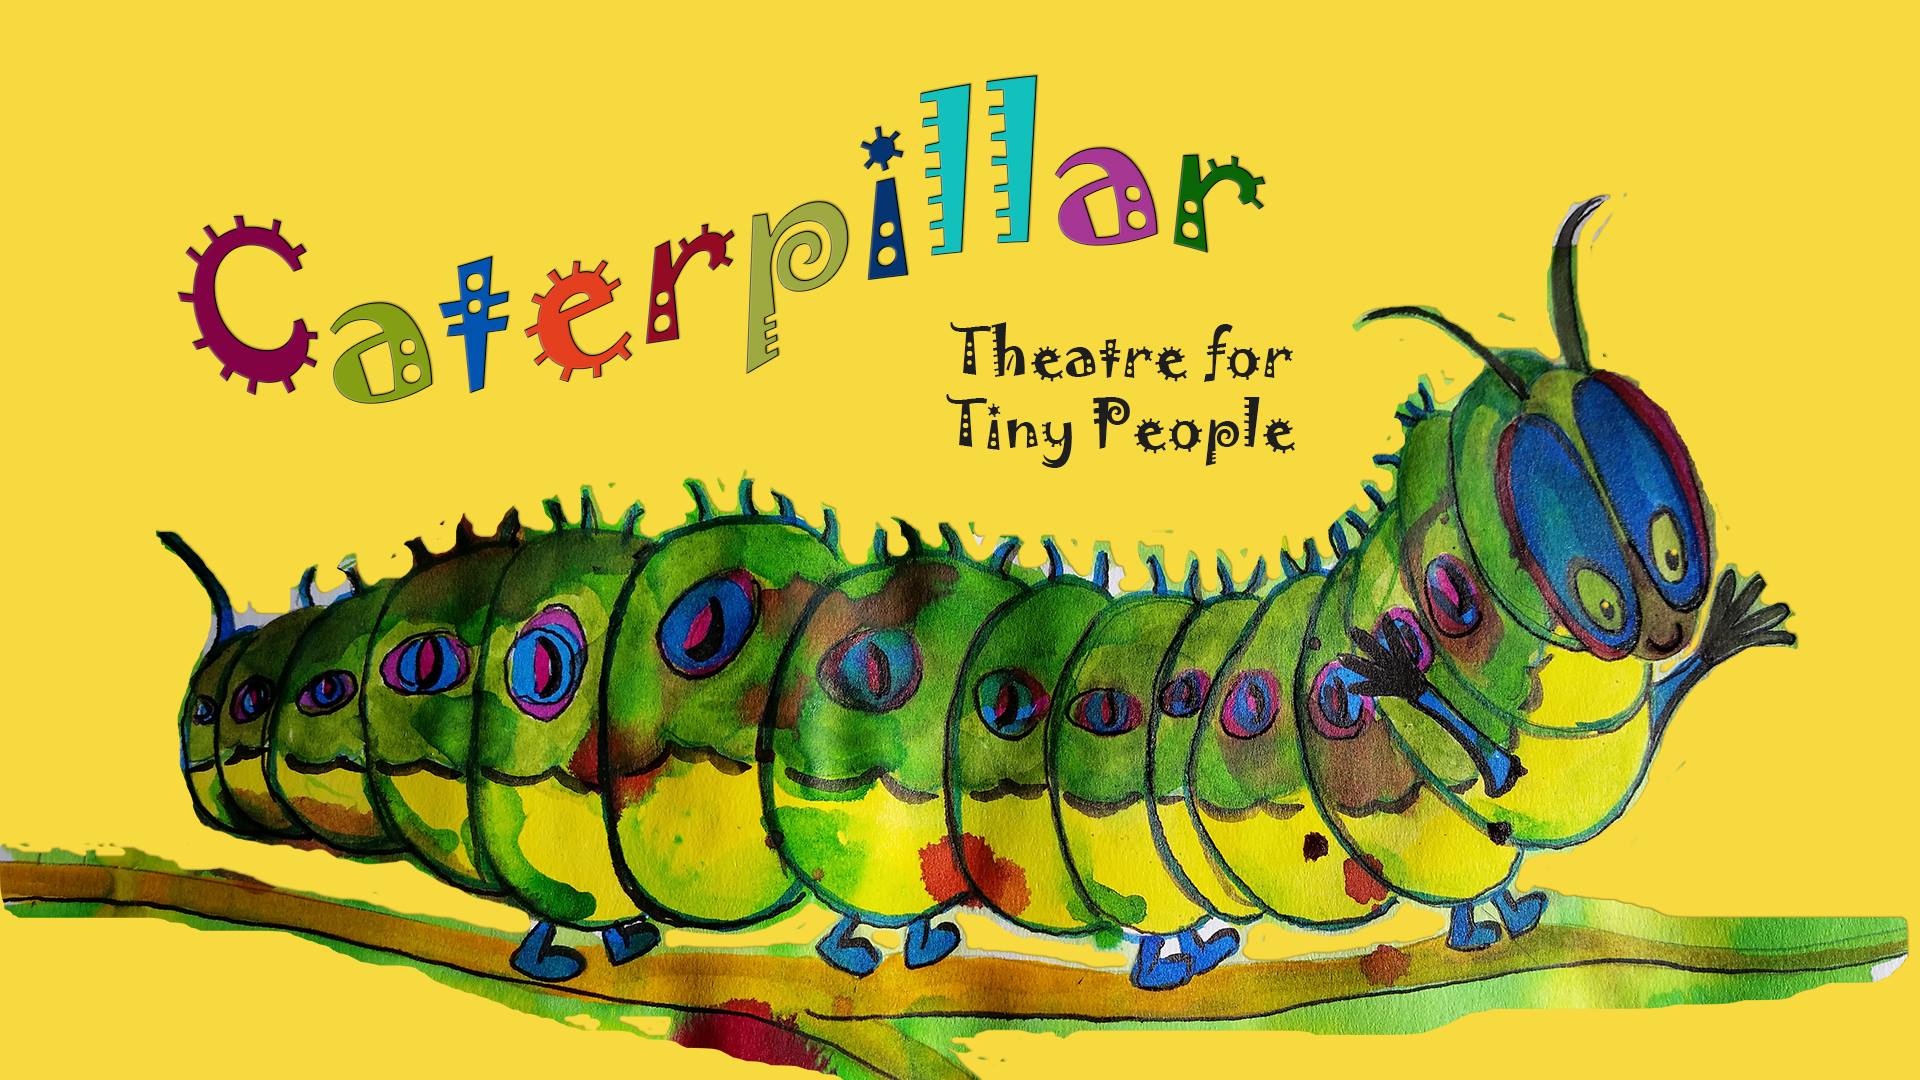 Get tickets now: Stiltskin’s Caterpillar production takes to stage